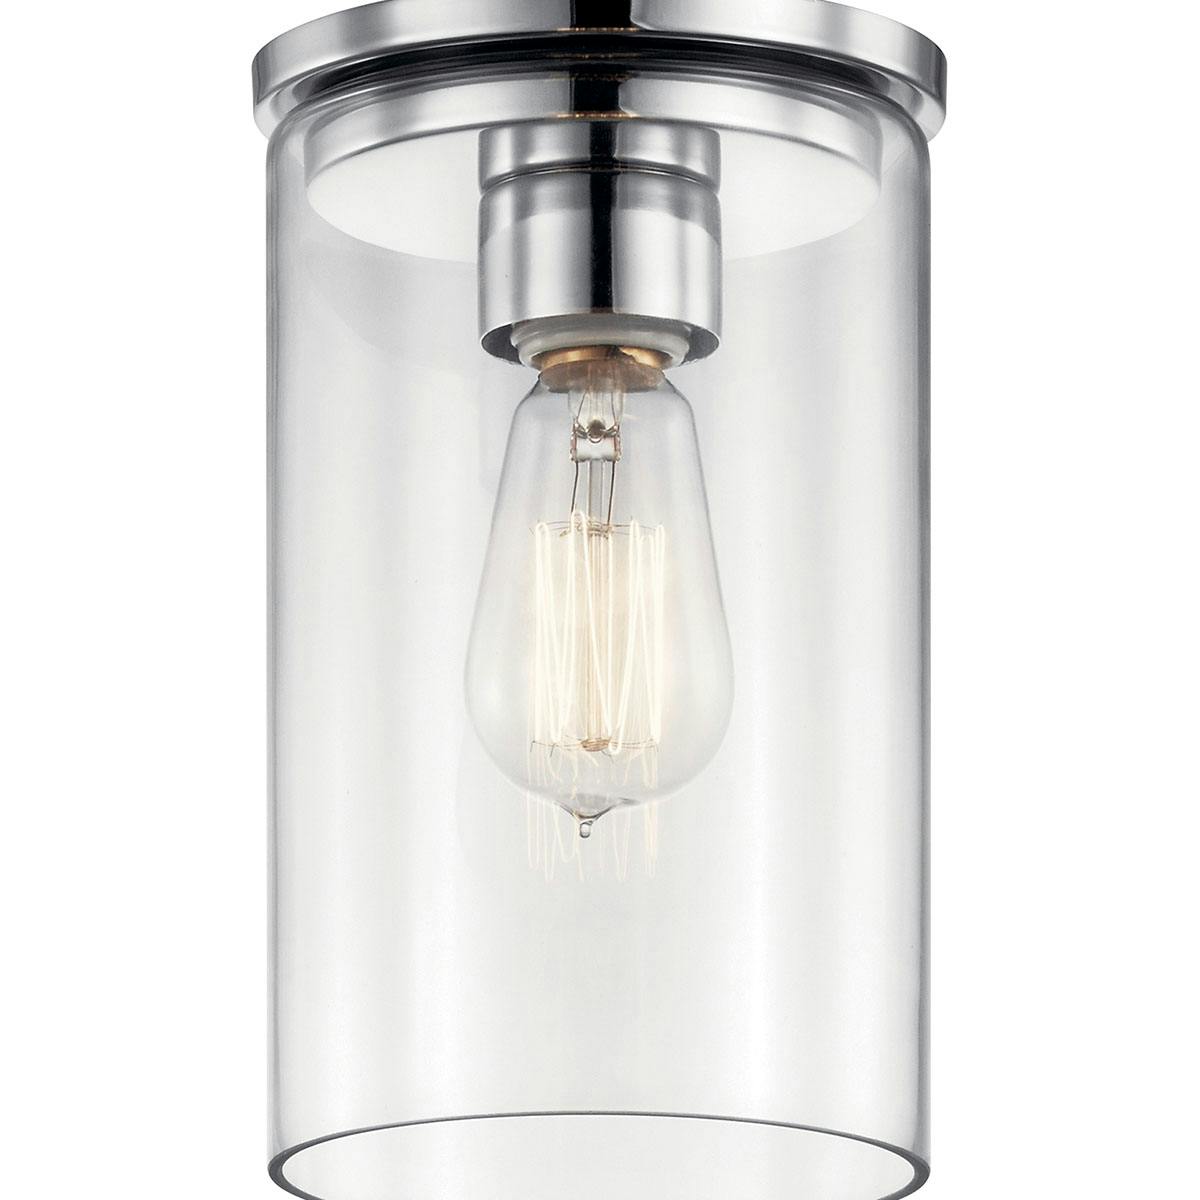 Close up view of the Crosby 10.75" 1 Light Mini Pendant Chrome on a white background